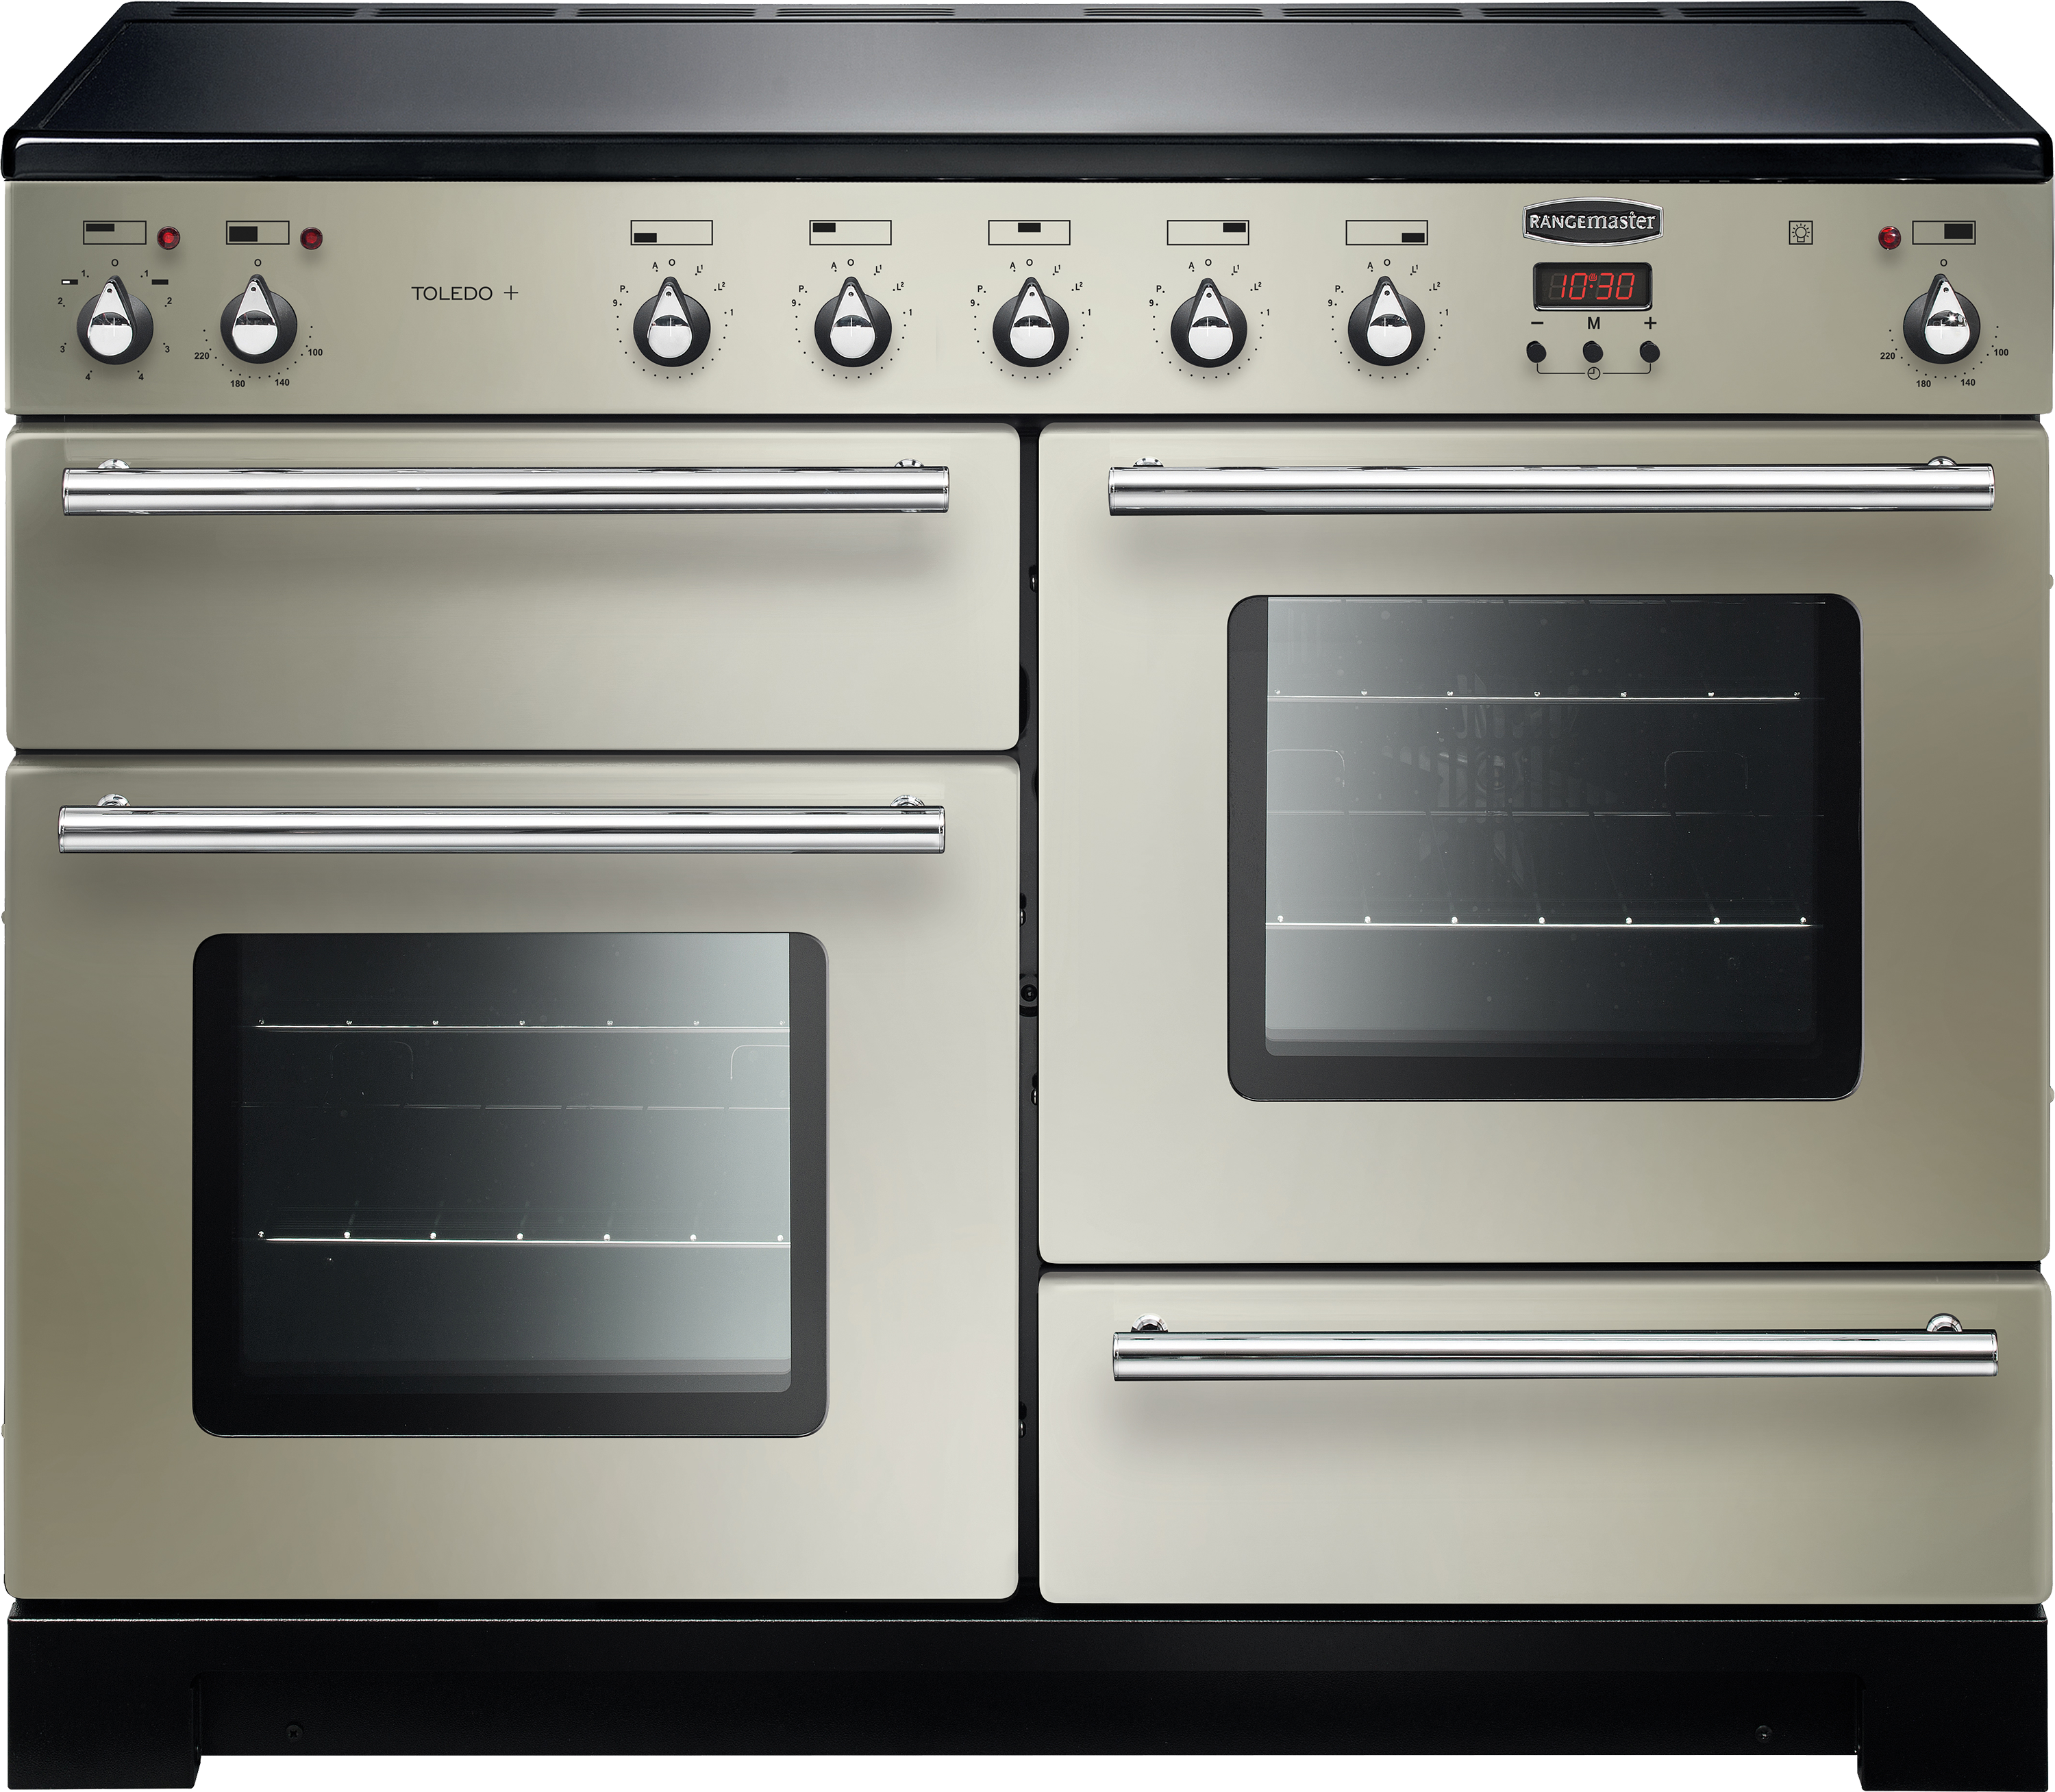 Rangemaster Toledo + TOLP110EIIV/C 110cm Electric Range Cooker with Induction Hob - Ivory / Chrome - A/A Rated, Cream